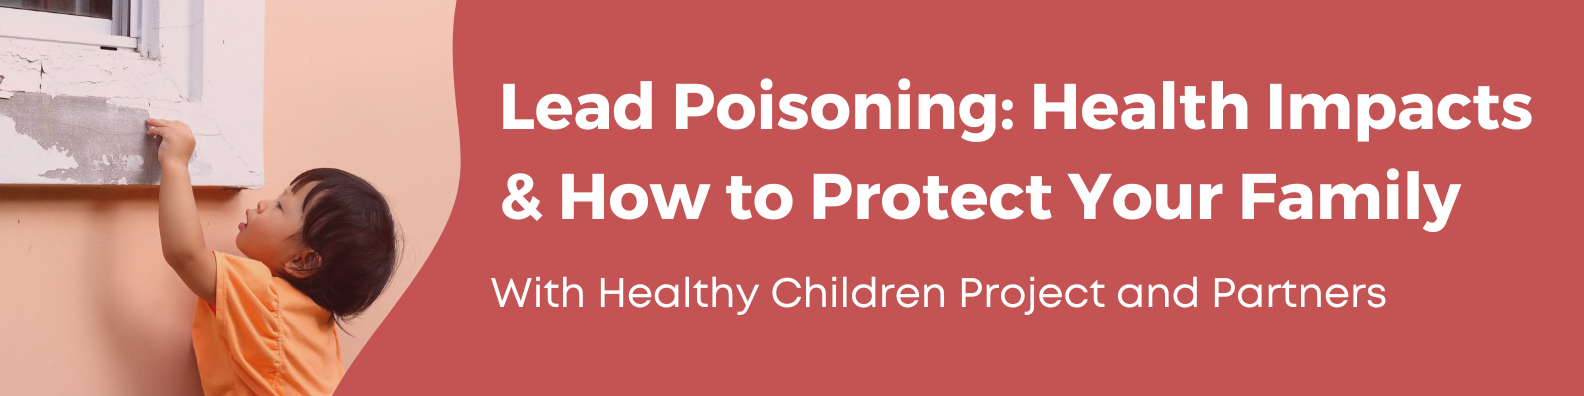 Lead Poisoning: Health Impacts & How to Protect Your Family